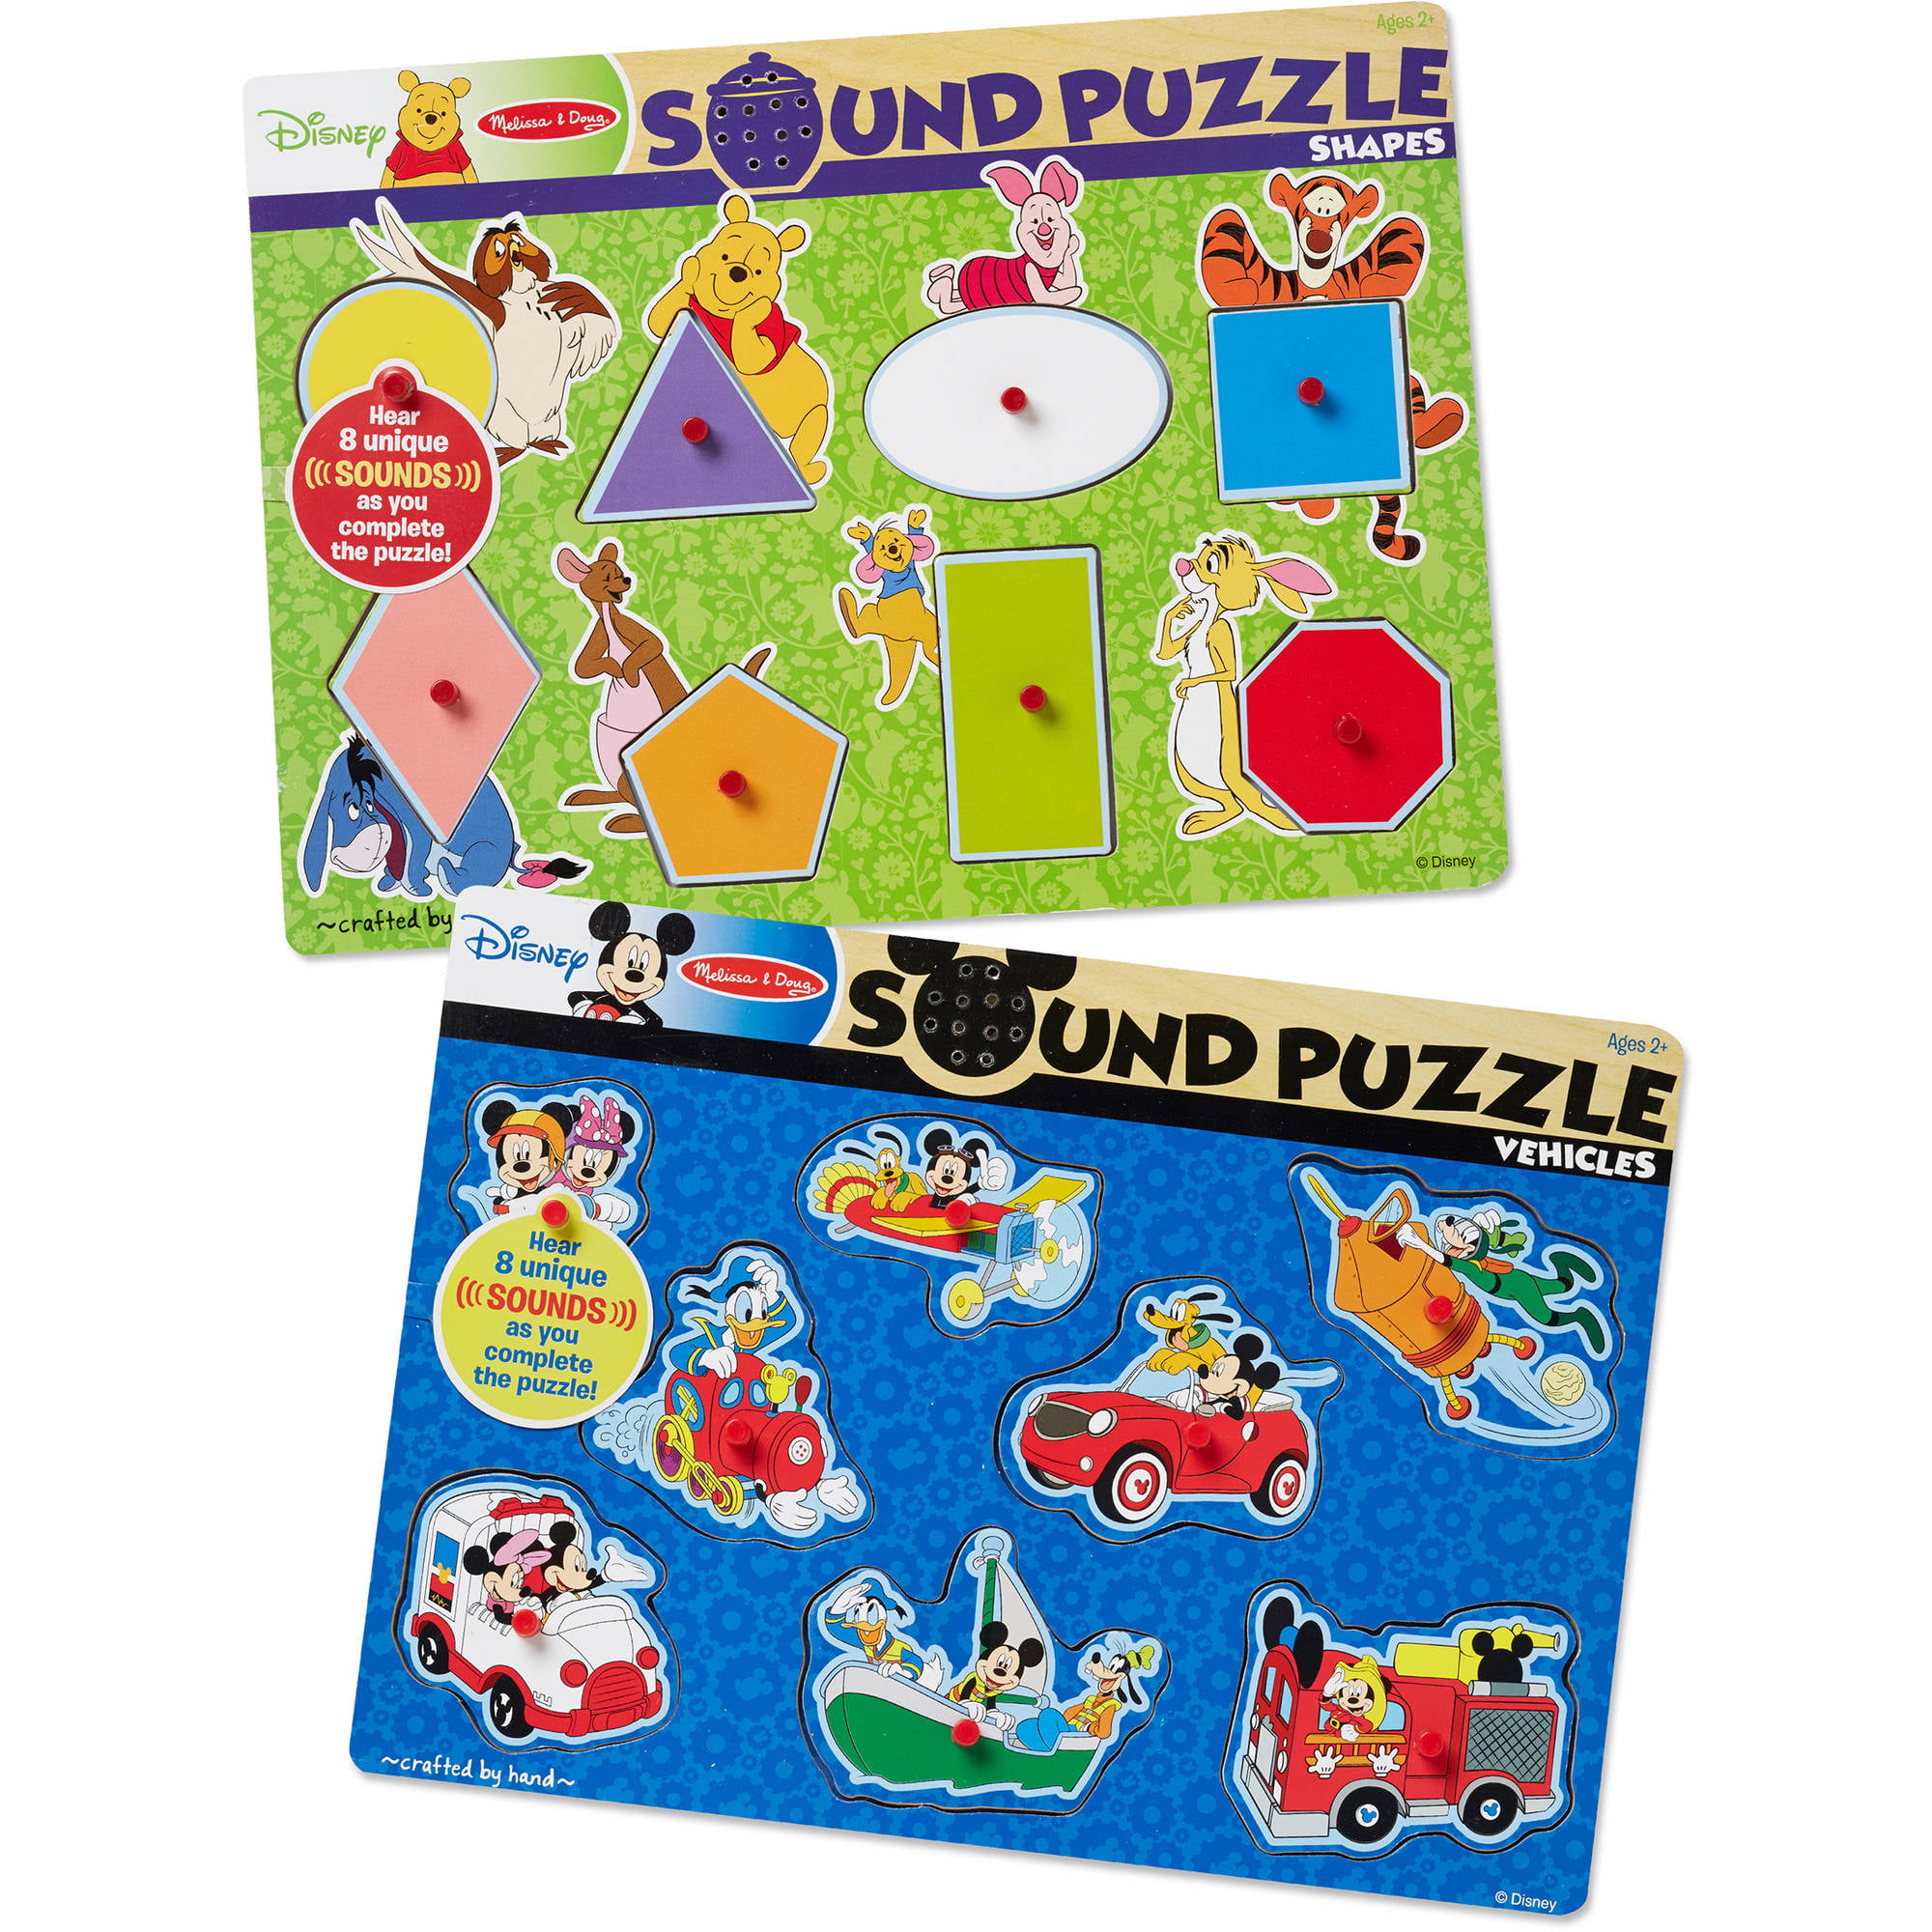 Melissa & Doug Disney Sound Puzzles Set Winnie the Pooh Shapes and Mickey Mouse Vehicles 